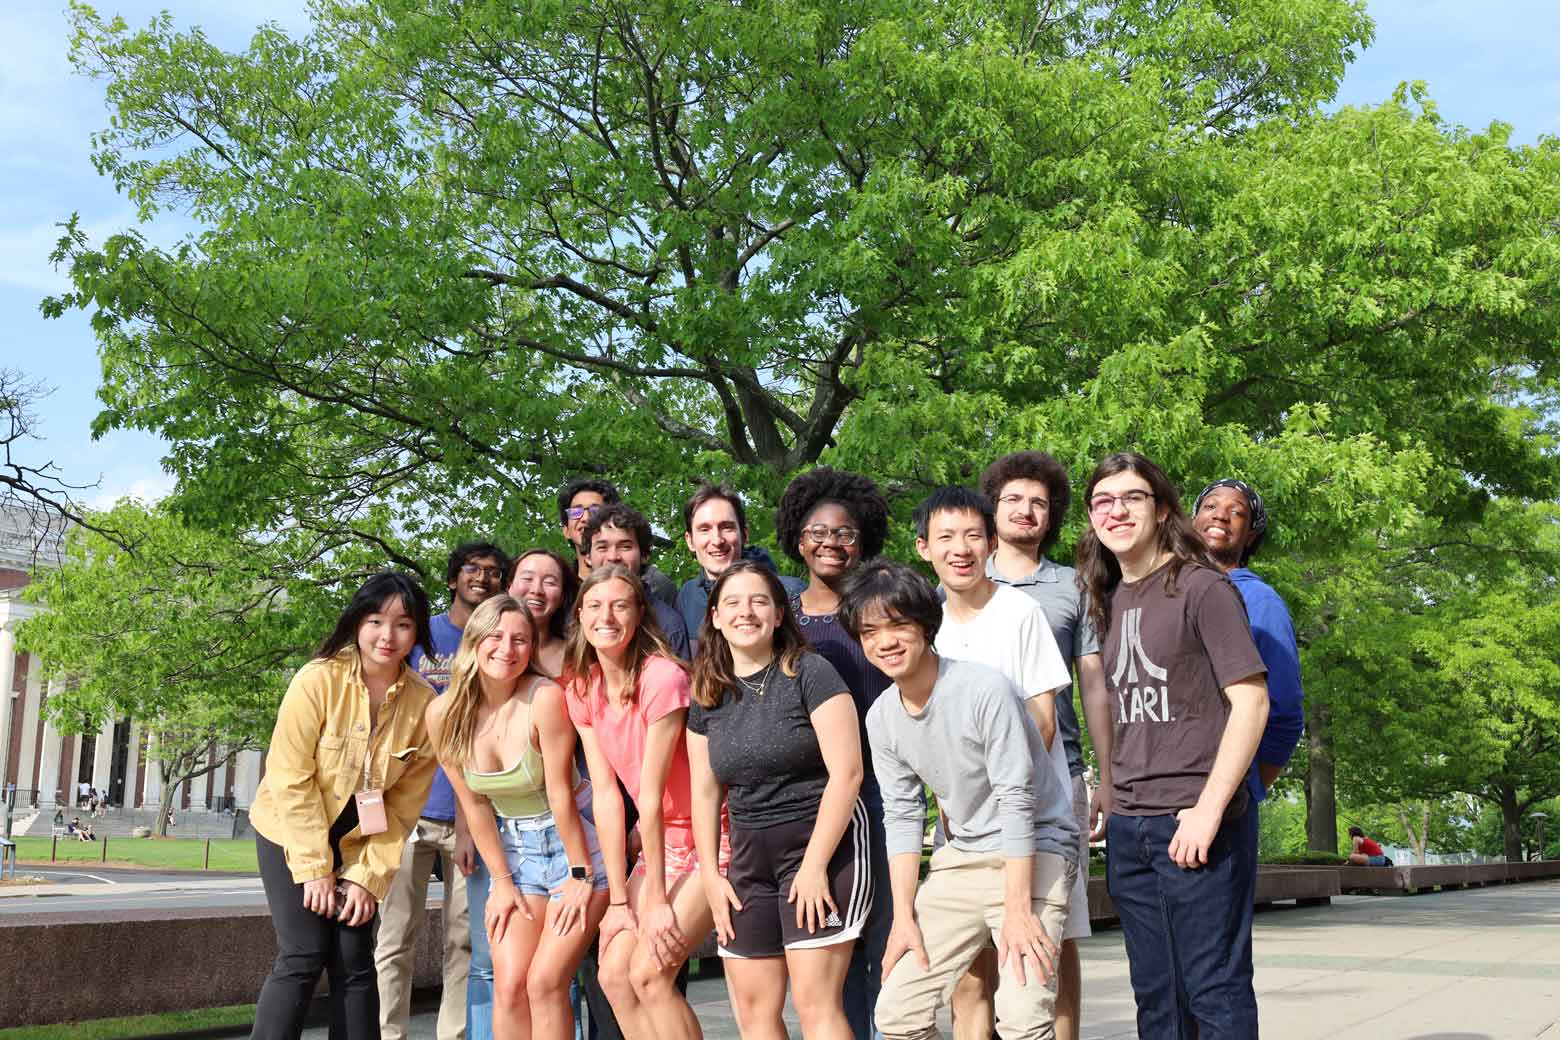 privacy-tech-lab team members in a group portrait outside of Exley Science Center at Wesleyan University.